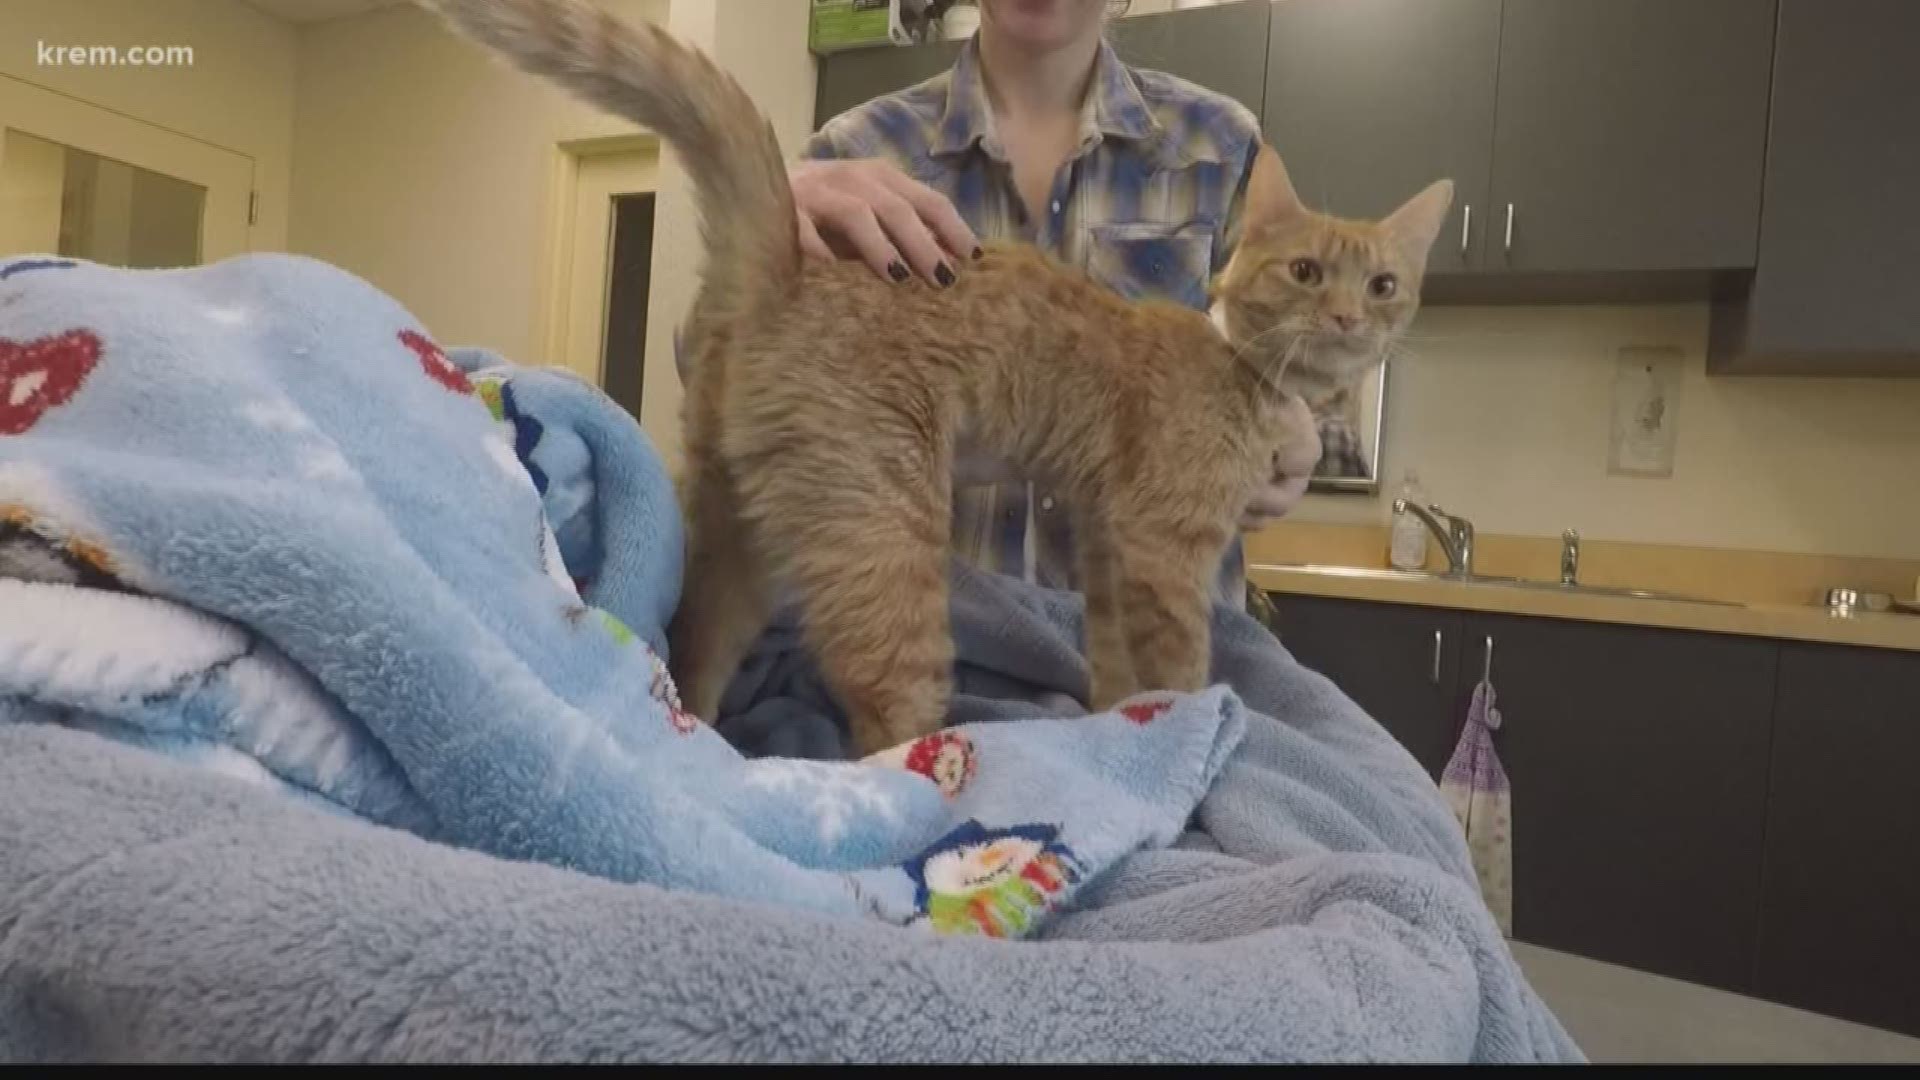 Ariel, a former stray cat, was brought into SCRAPS a few weeks ago. It was then that staff members discovered she was battling a rare form of breast cancer.